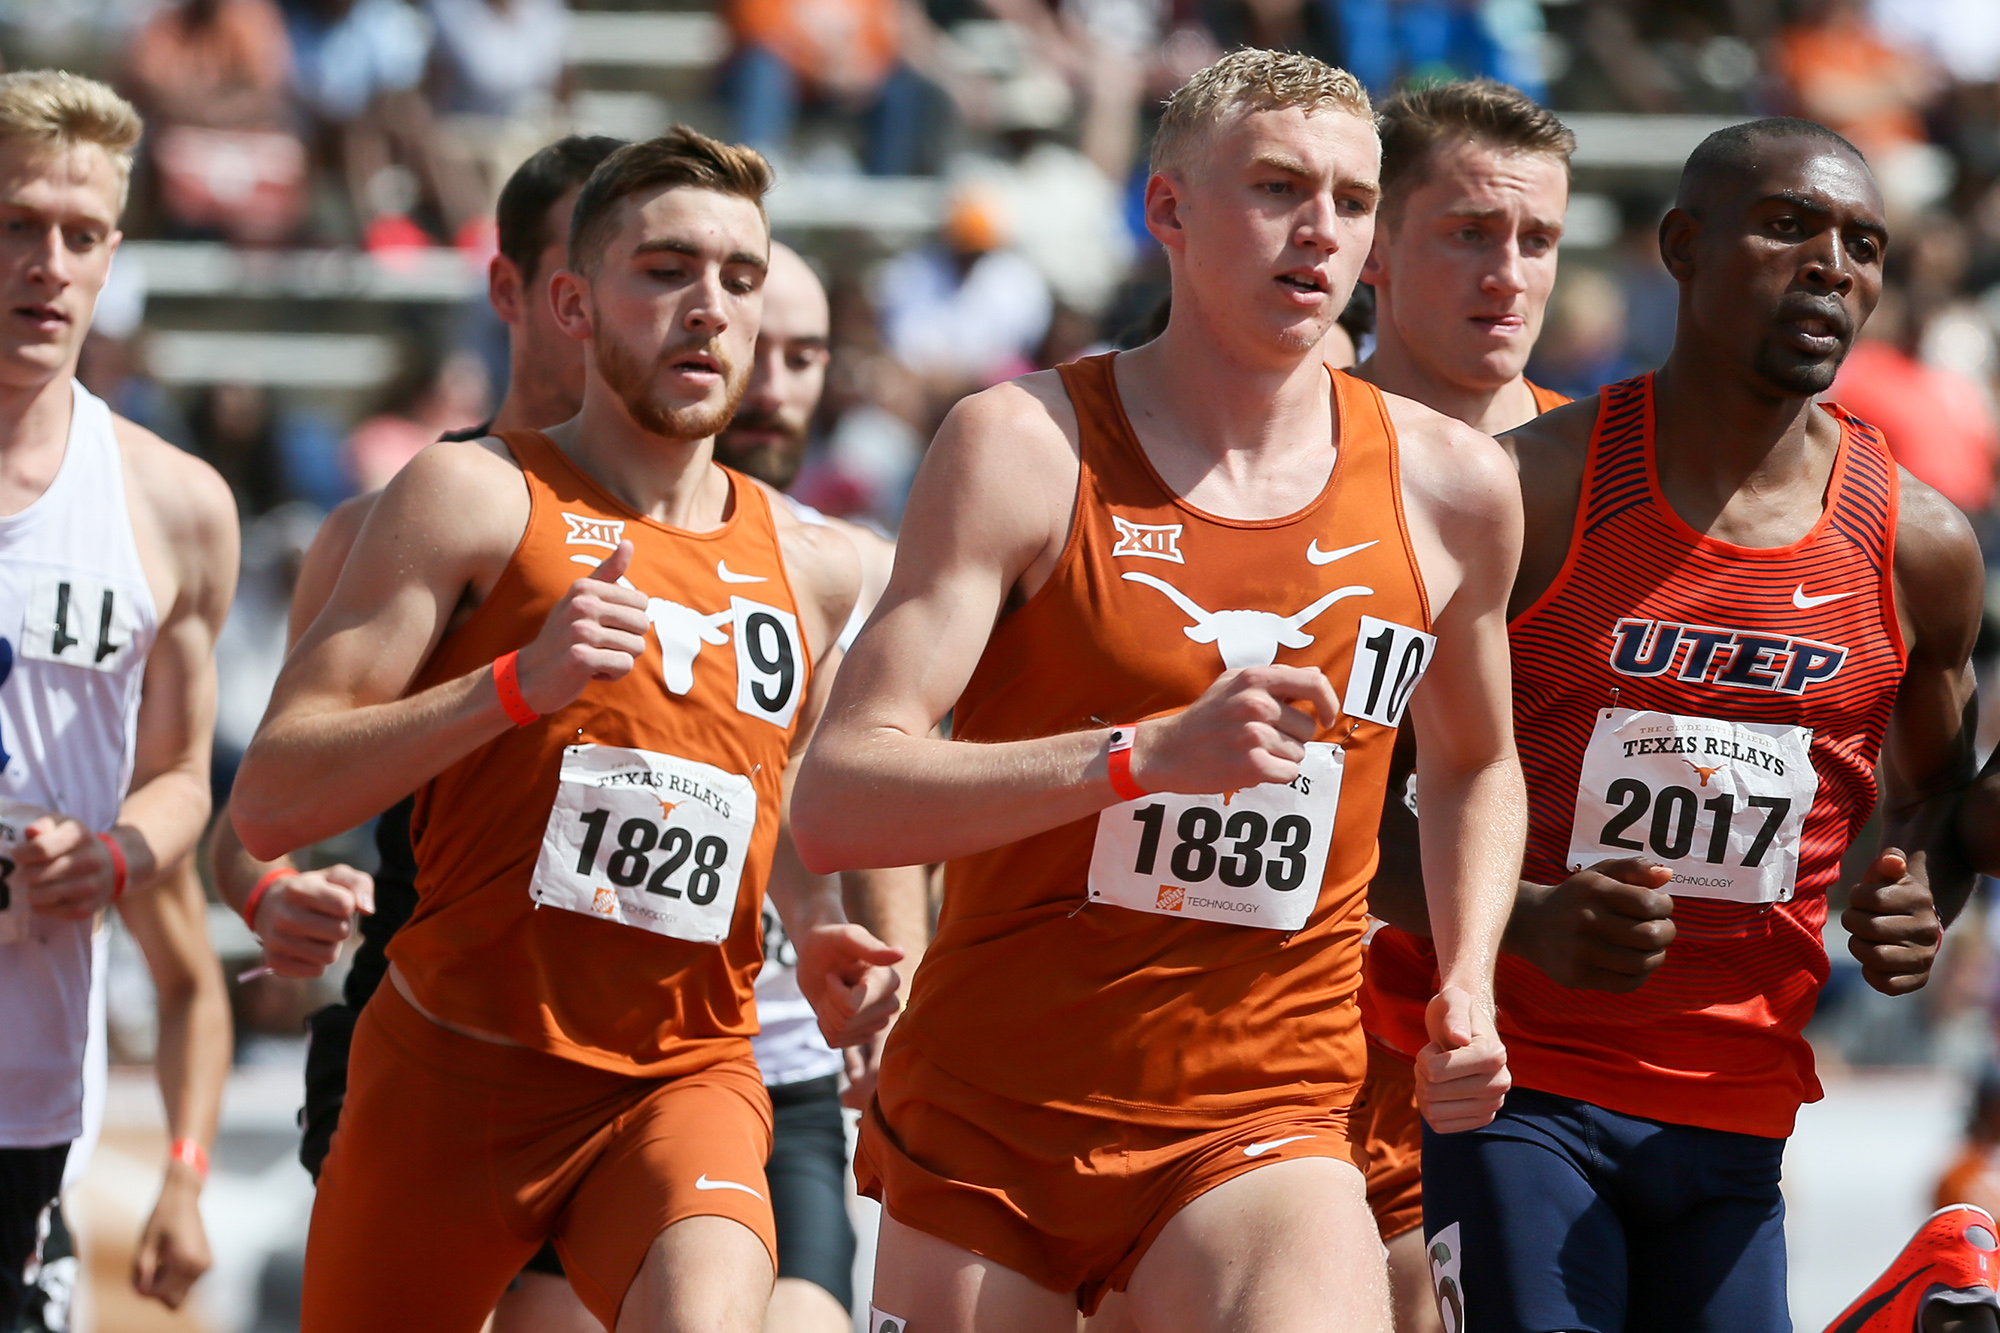 Two former area stars earn Big 12 track and field honors